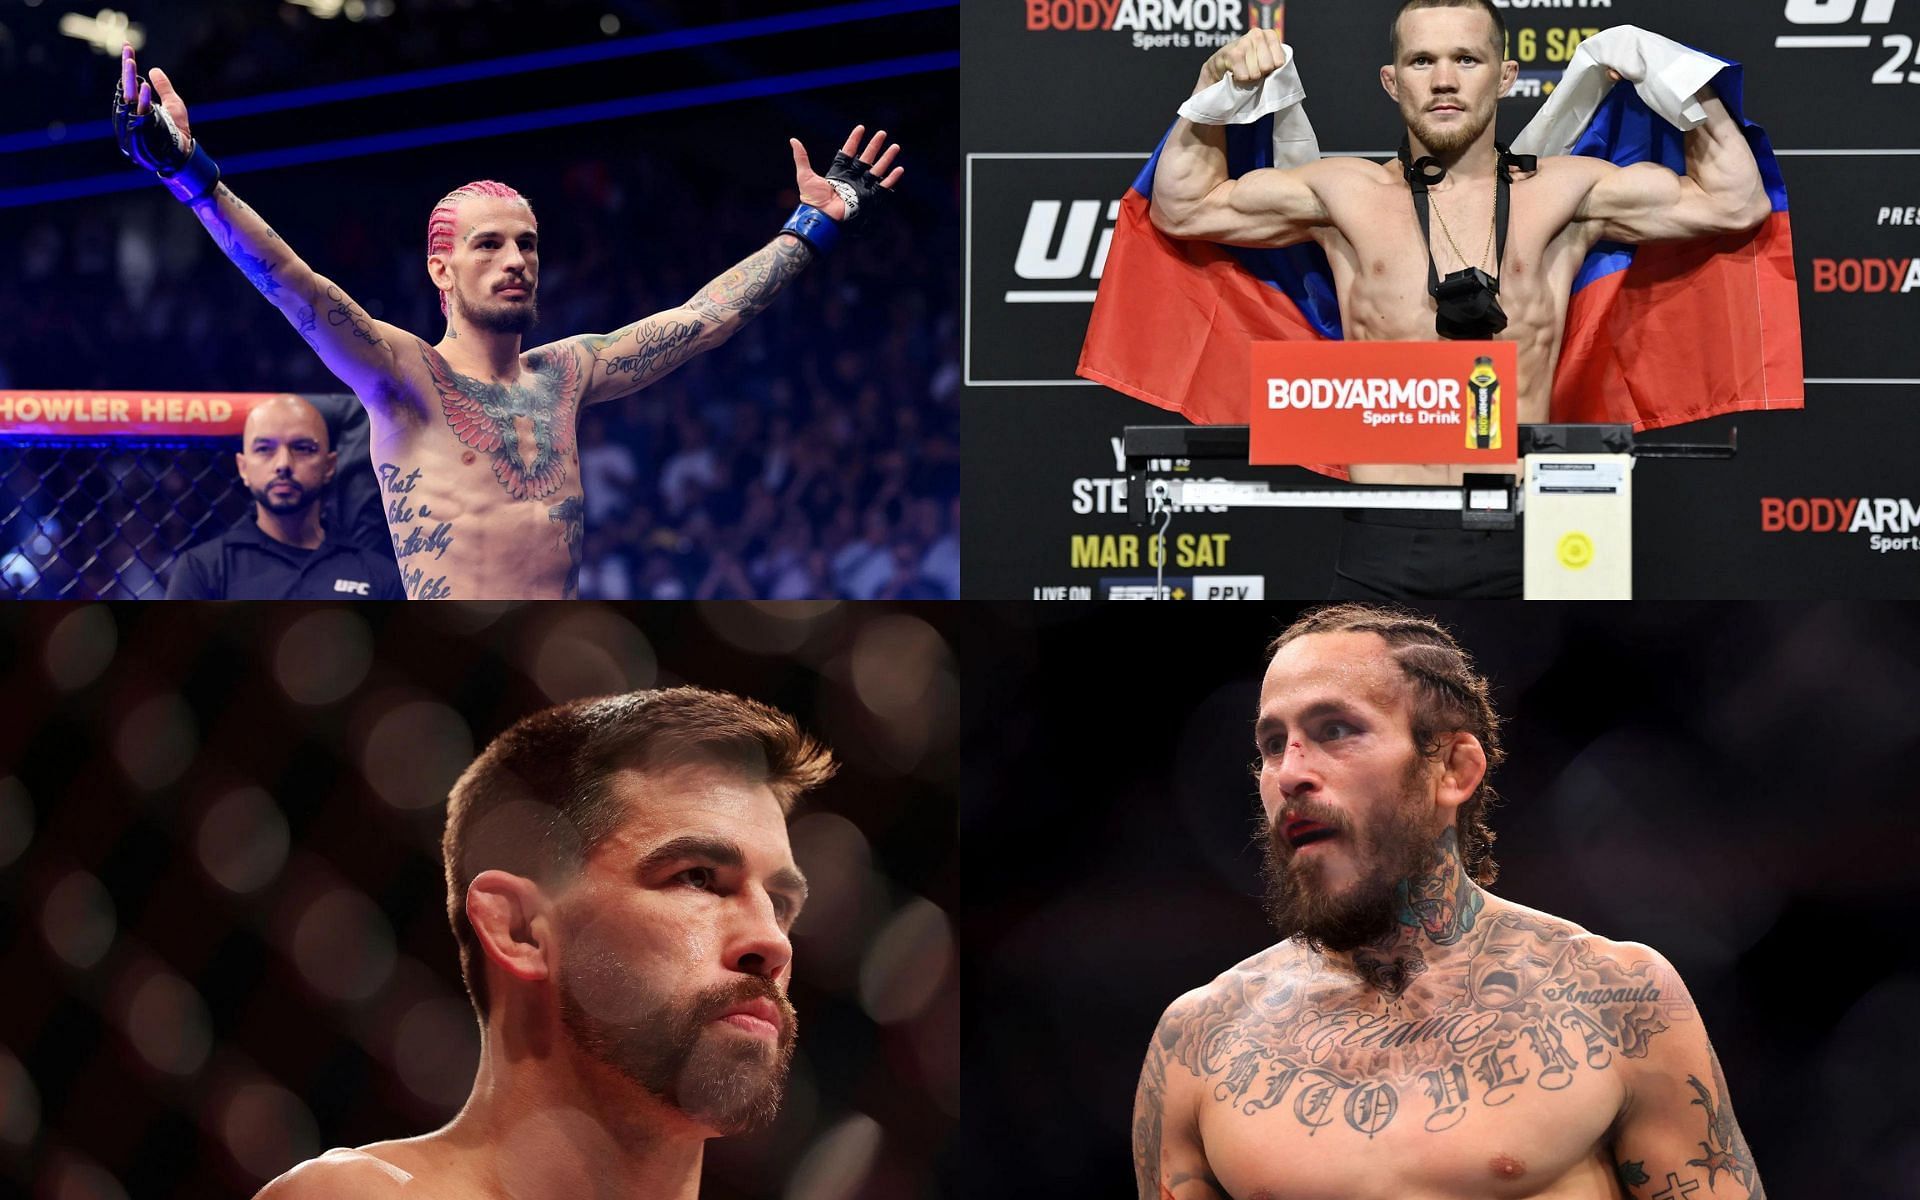 Clockwise, starting from top left: Sean O&#039;Malley, Petr Yan, Dominick Cruz, and Marlon Vera [ Images credits: Getty Images ]